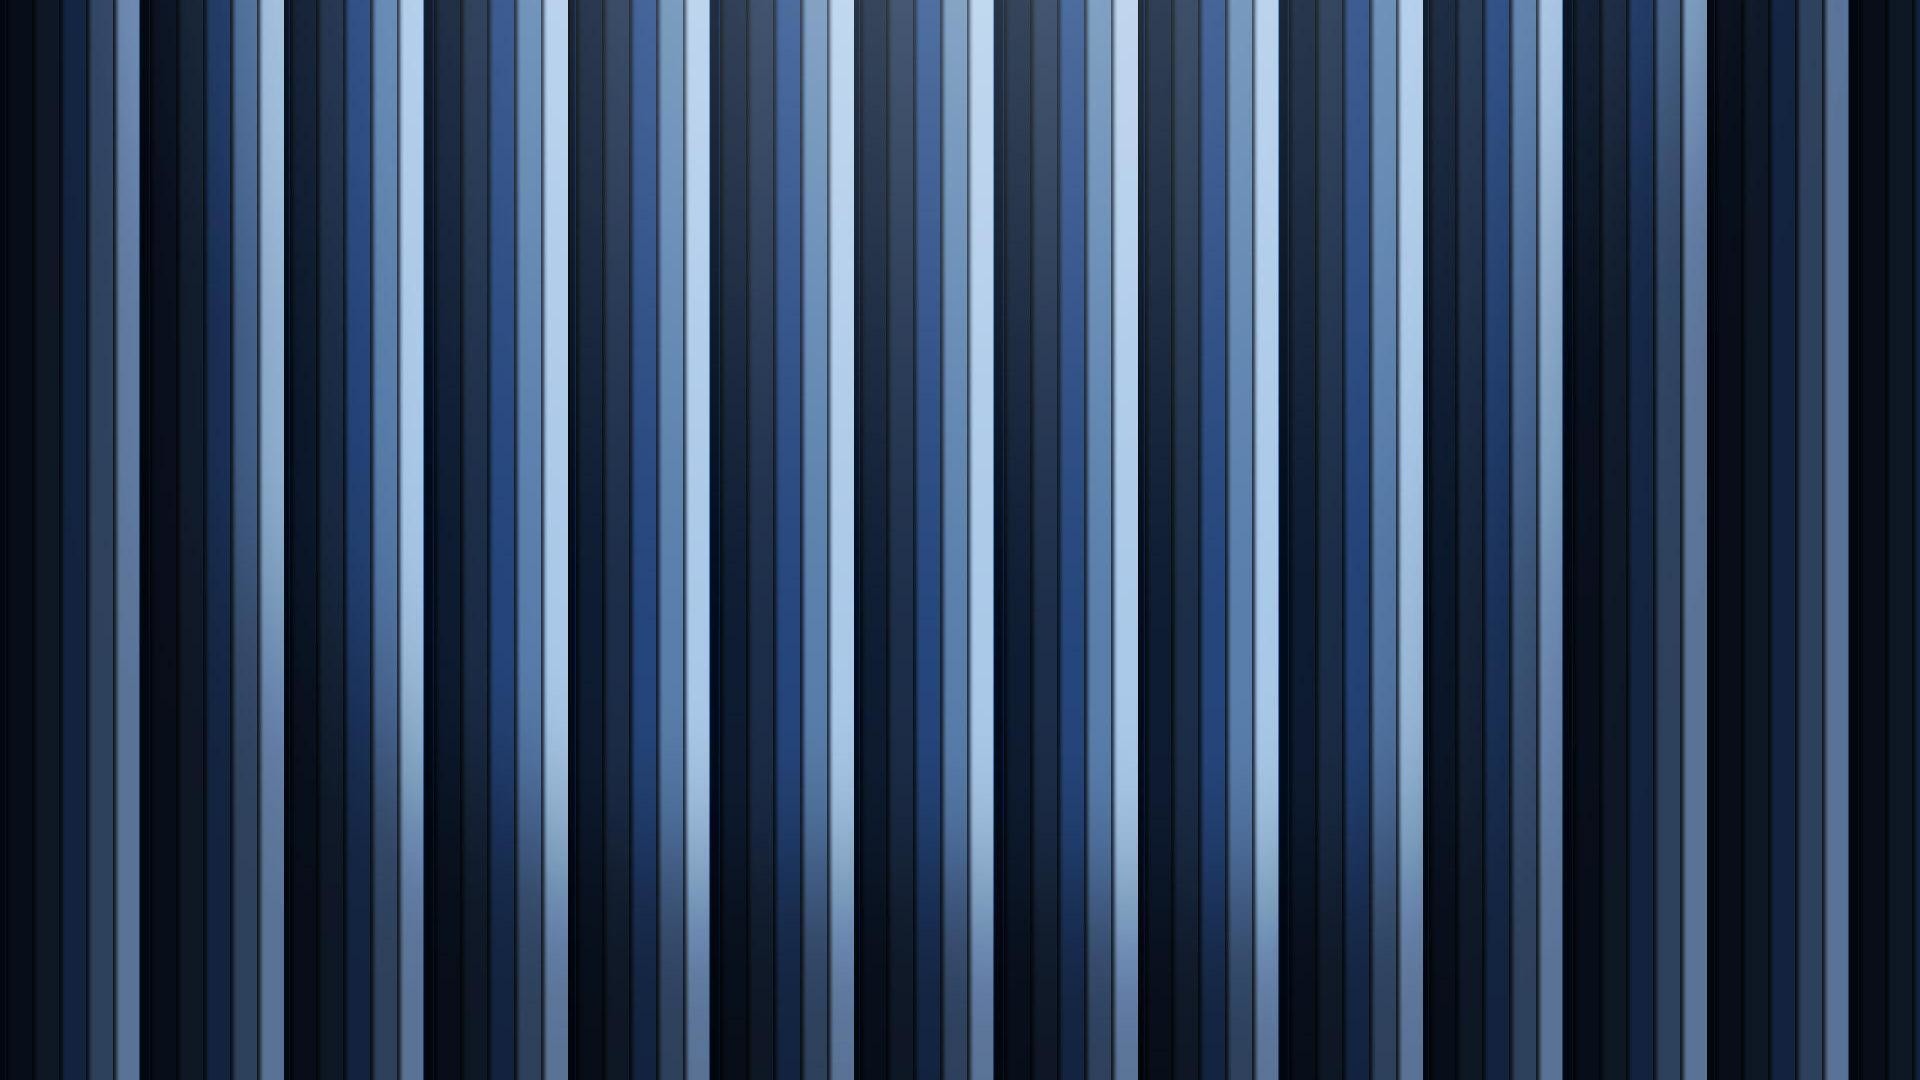 1920x1080  | Black and Blue Striped Wallpaper